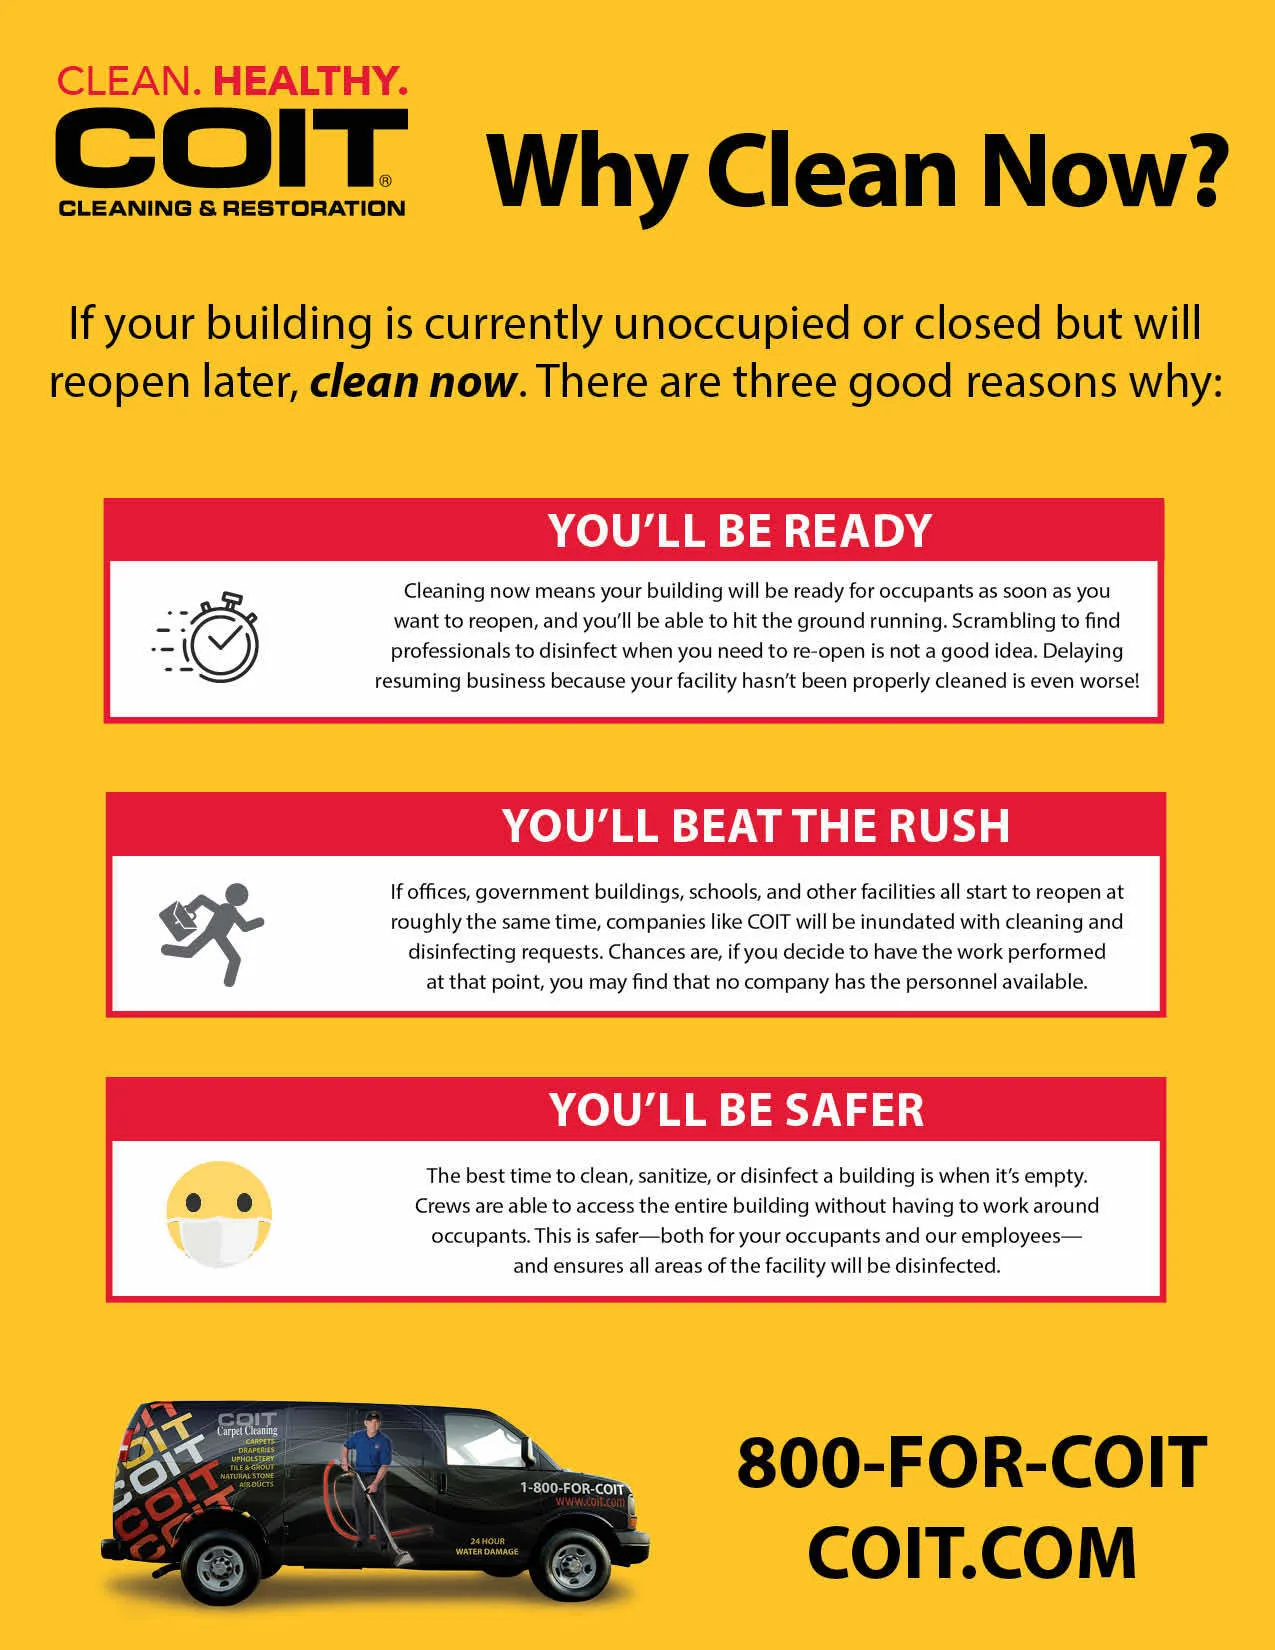 COIT Why Clean Now Infographic1_3